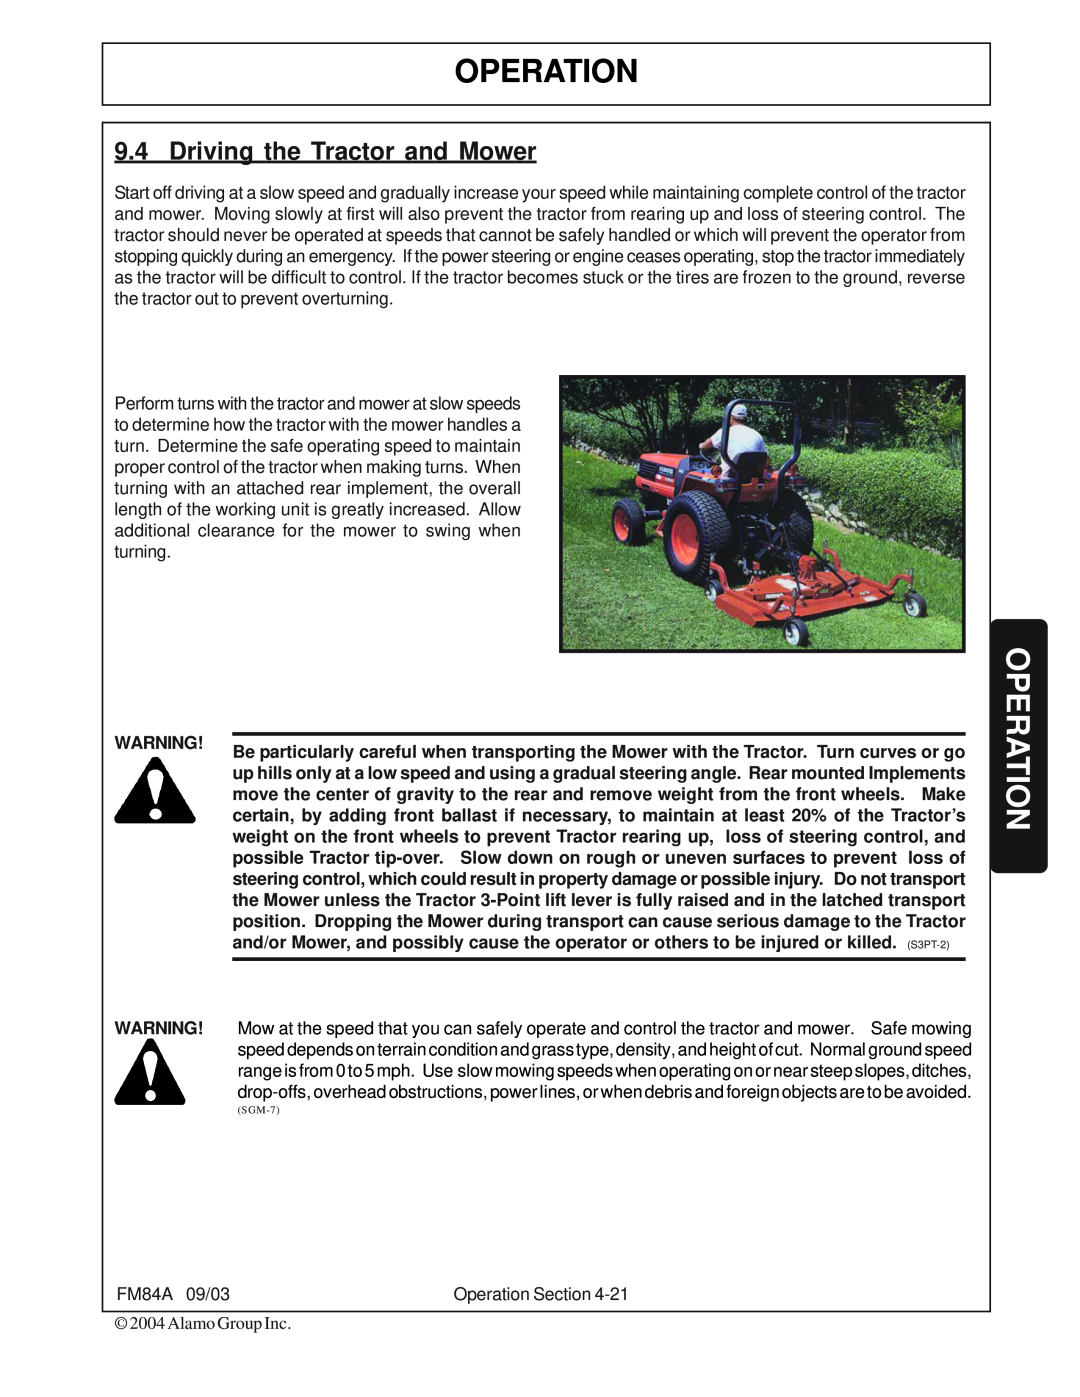 Servis-Rhino FM84A manual Operation, Driving the Tractor and Mower 